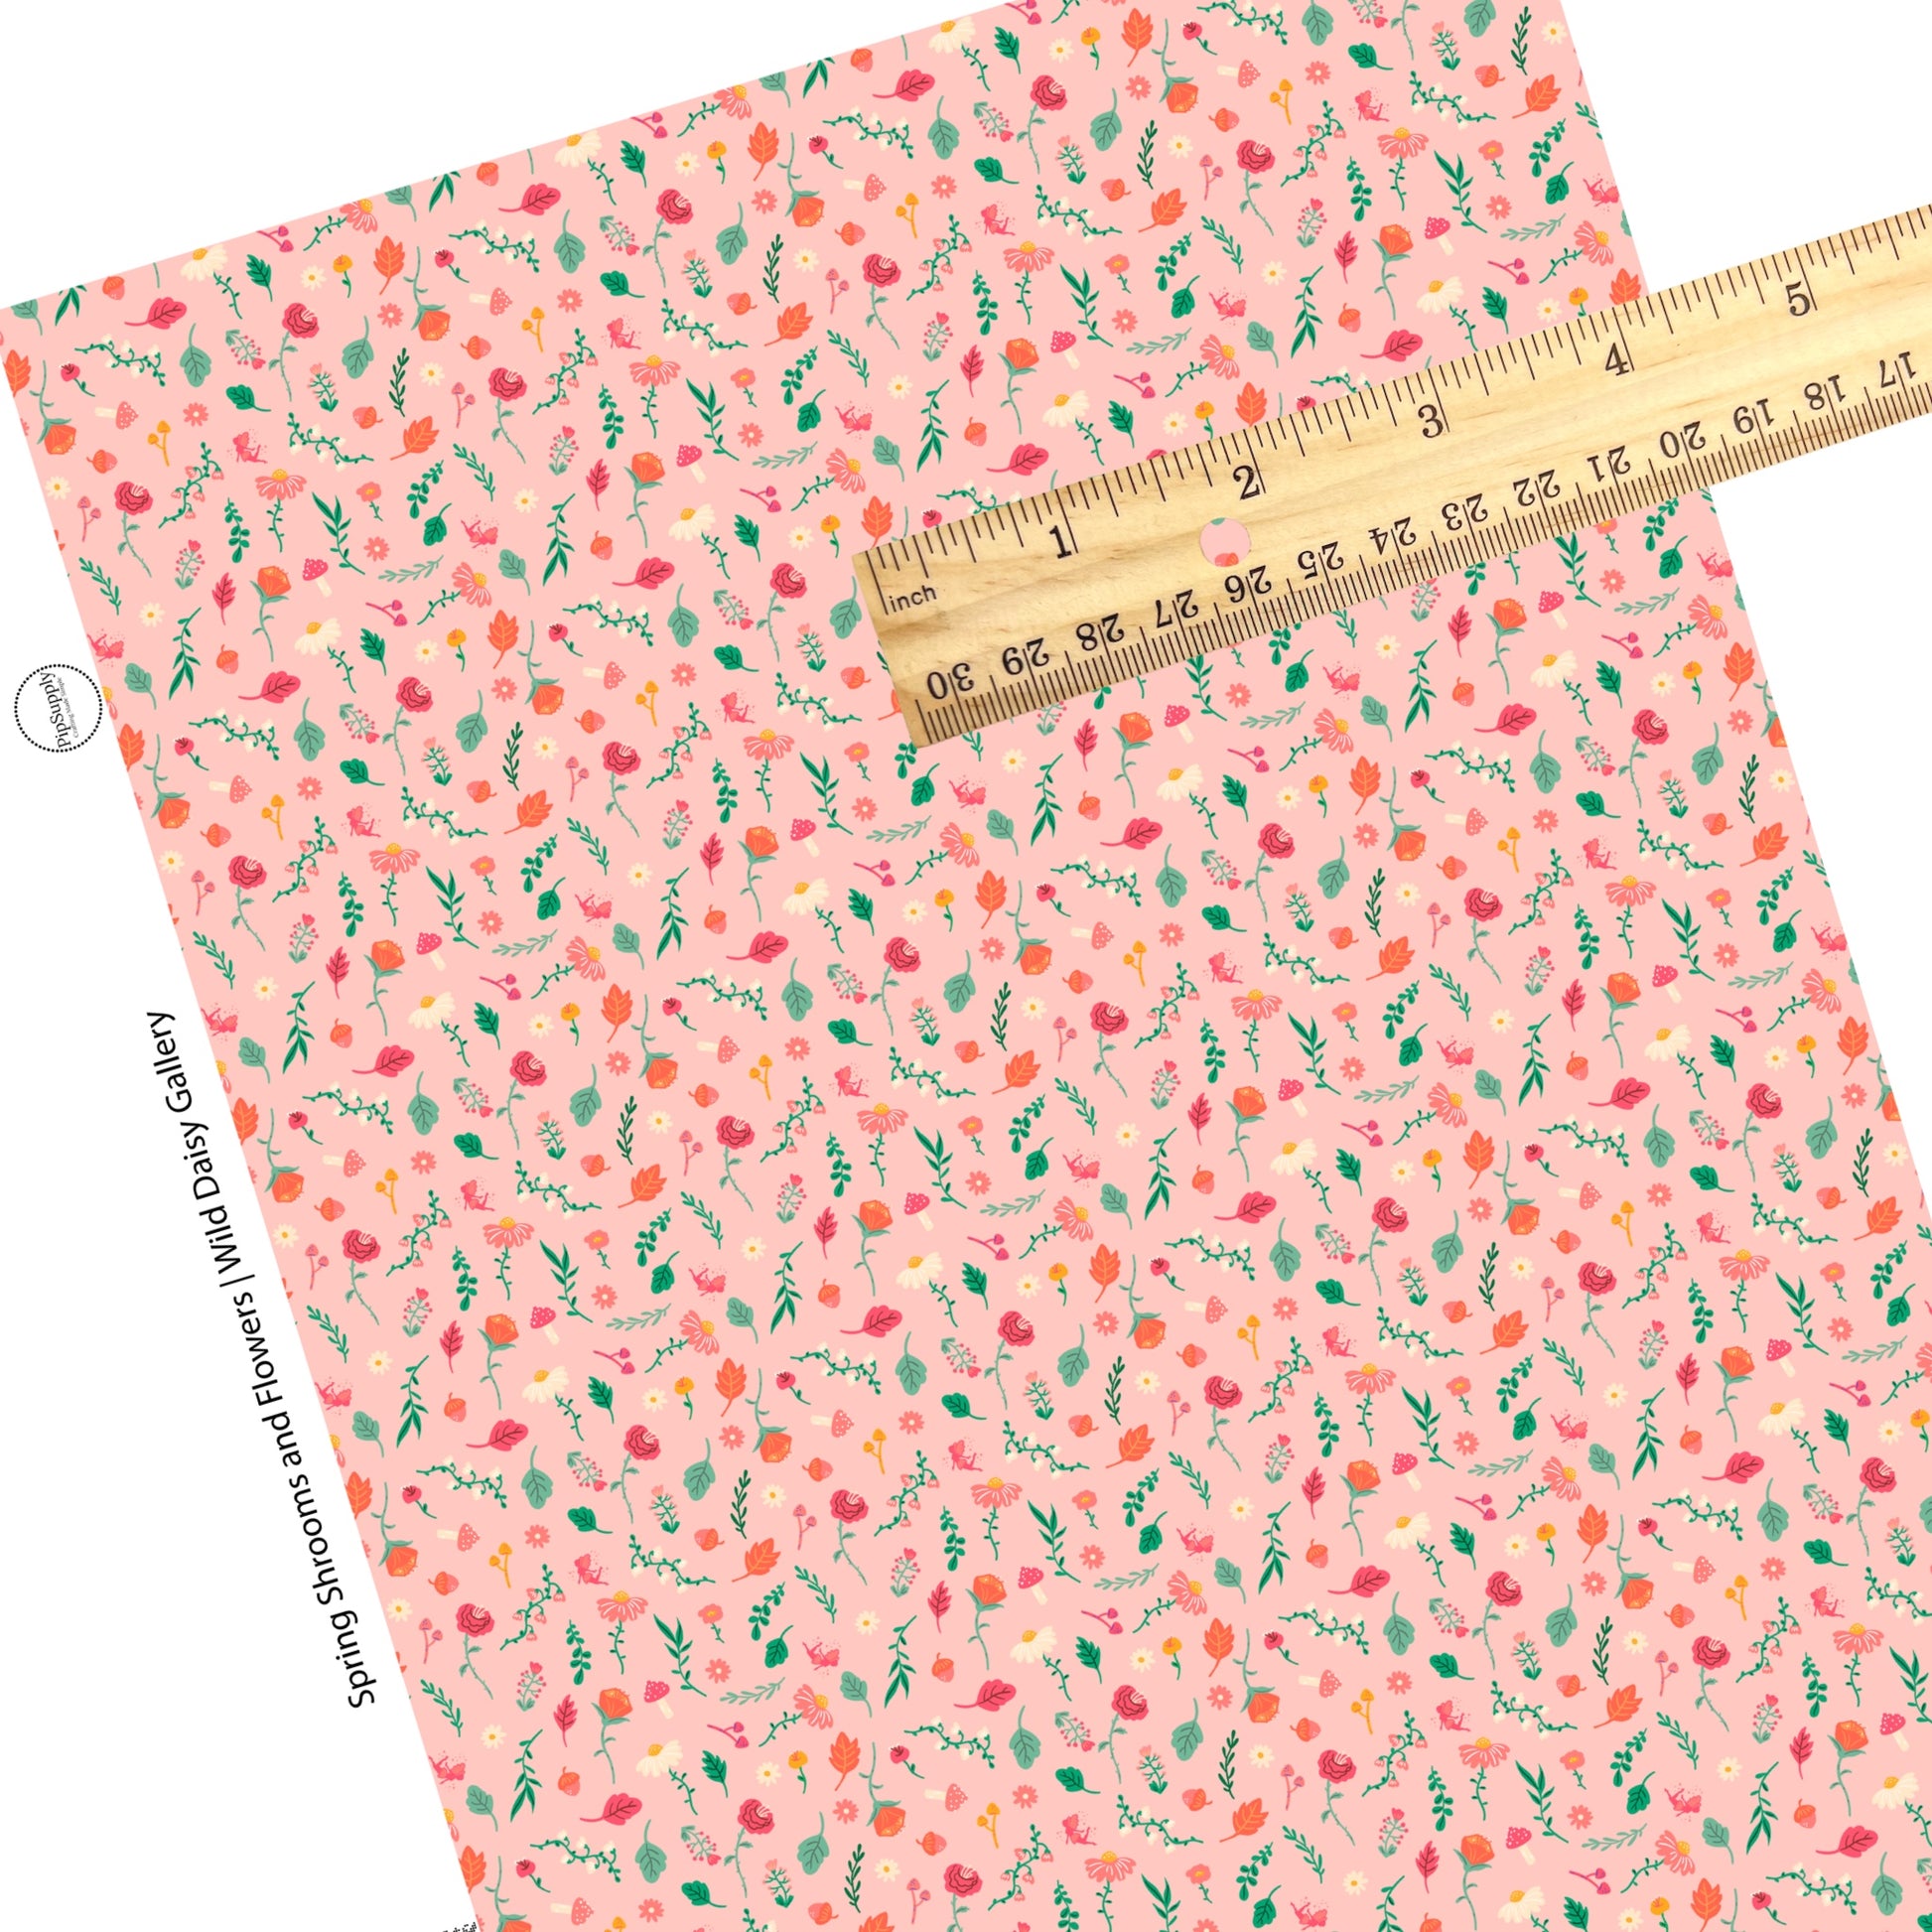 These spring floral pattern themed faux leather sheets contain the following design elements: colorful flowers and mushrooms on pink. Our CPSIA compliant faux leather sheets or rolls can be used for all types of crafting projects.